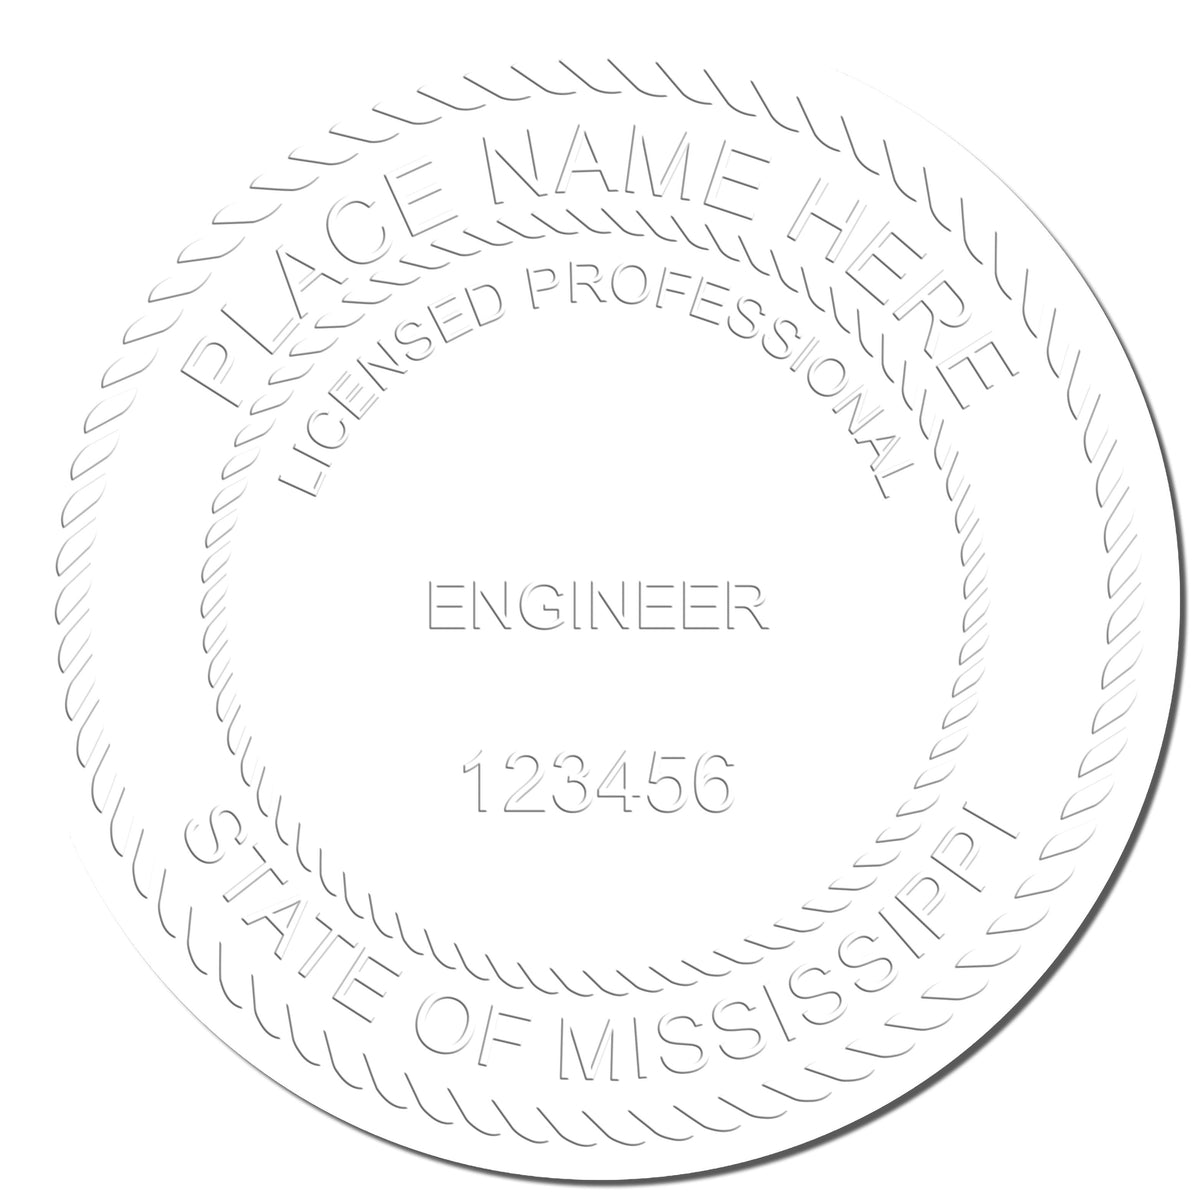 This paper is stamped with a sample imprint of the Gift Mississippi Engineer Seal, signifying its quality and reliability.